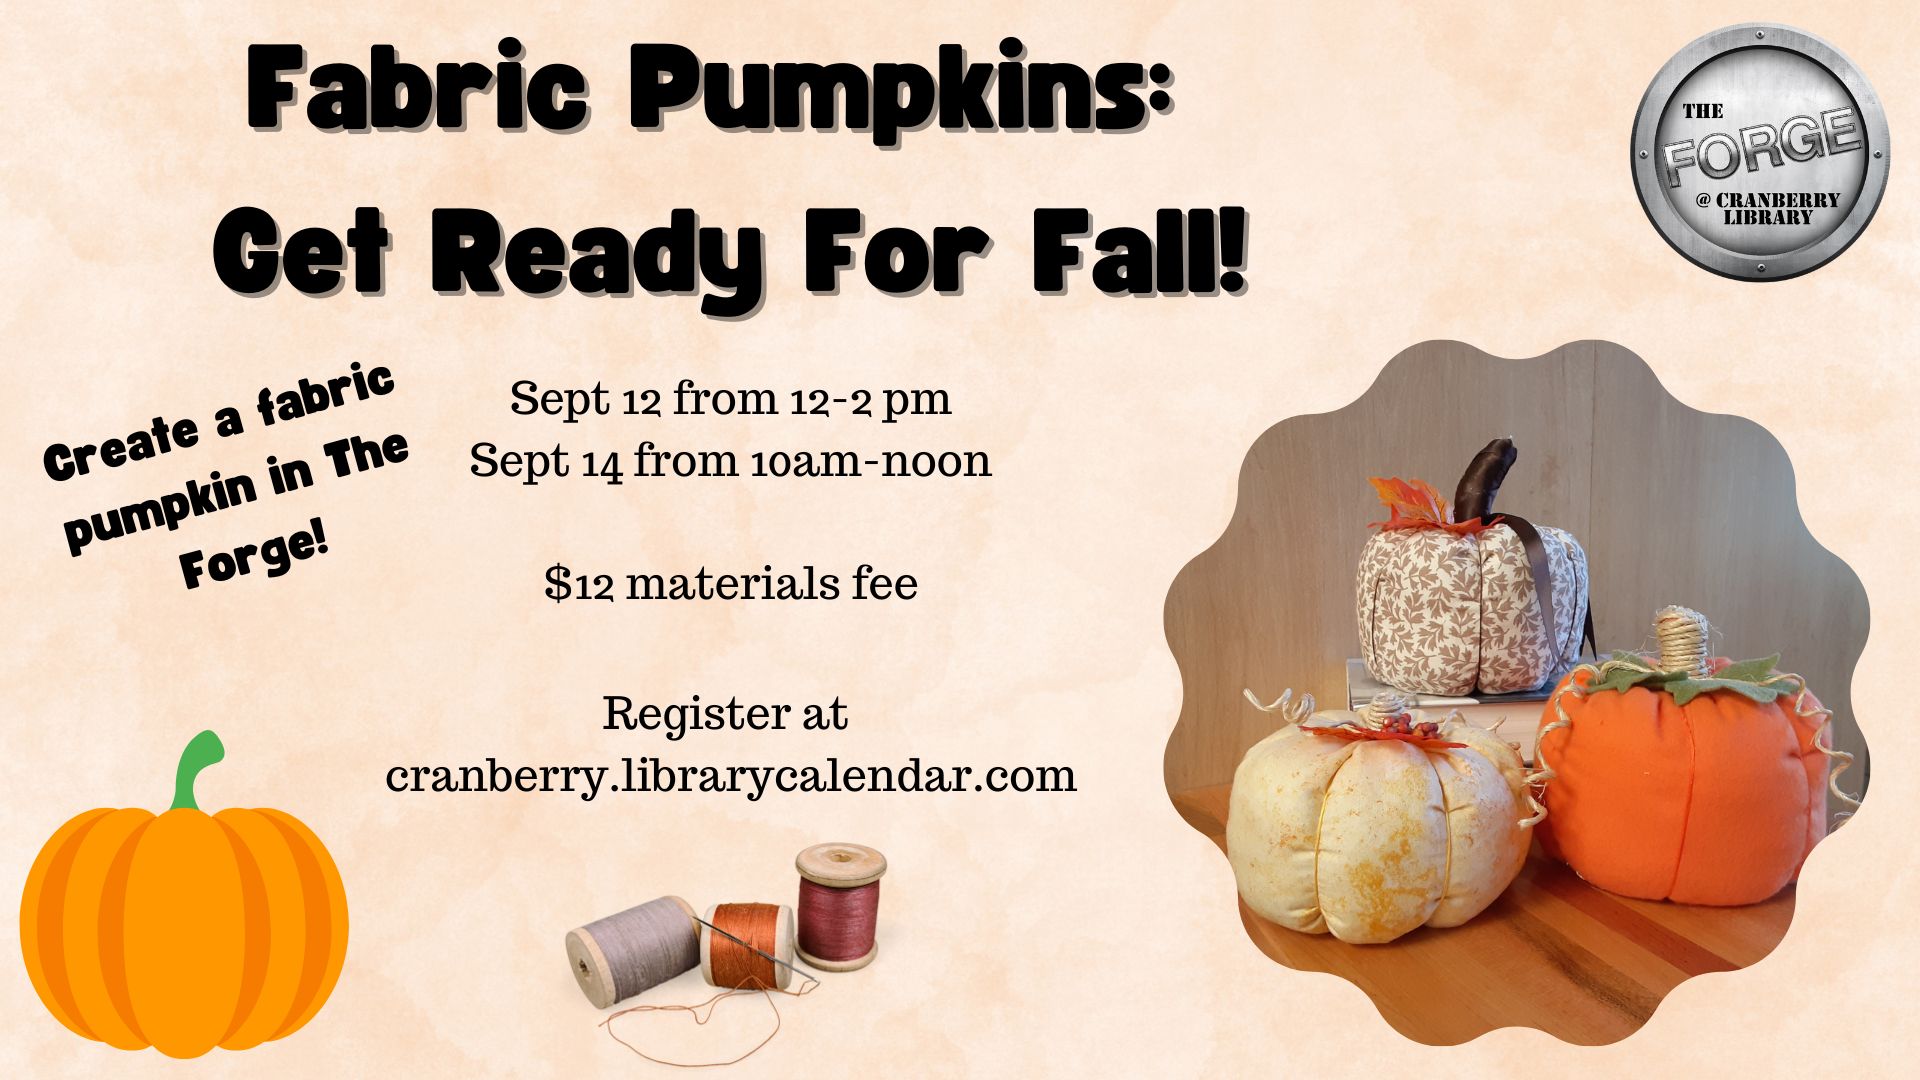 Flyer for Fabric Pumpkins class in The Forge